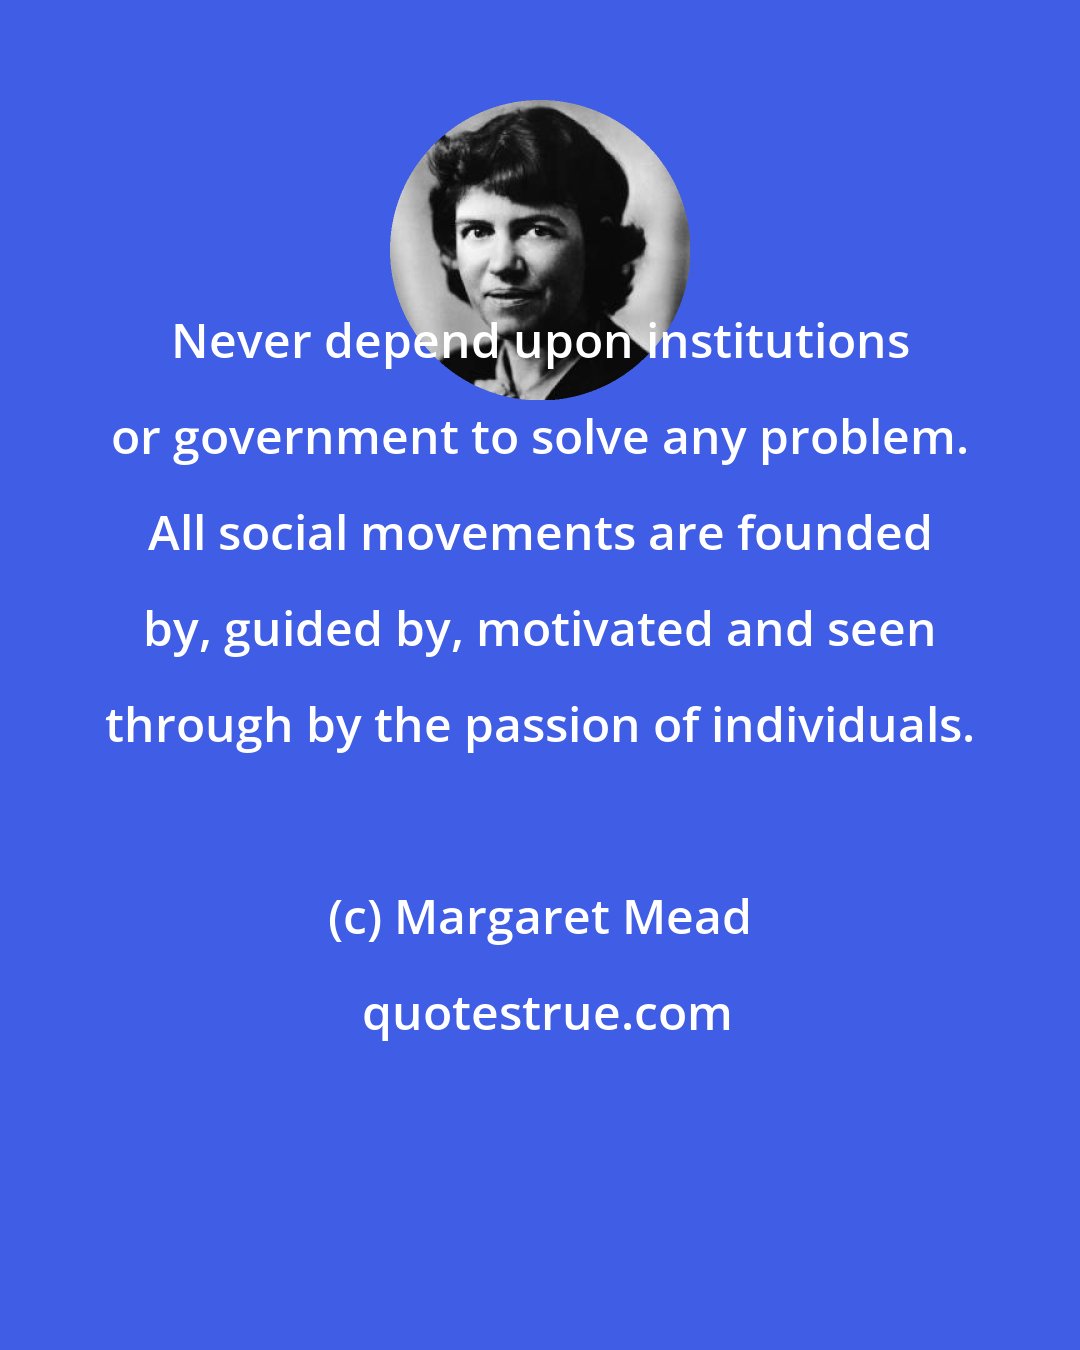 Margaret Mead: Never depend upon institutions or government to solve any problem. All social movements are founded by, guided by, motivated and seen through by the passion of individuals.